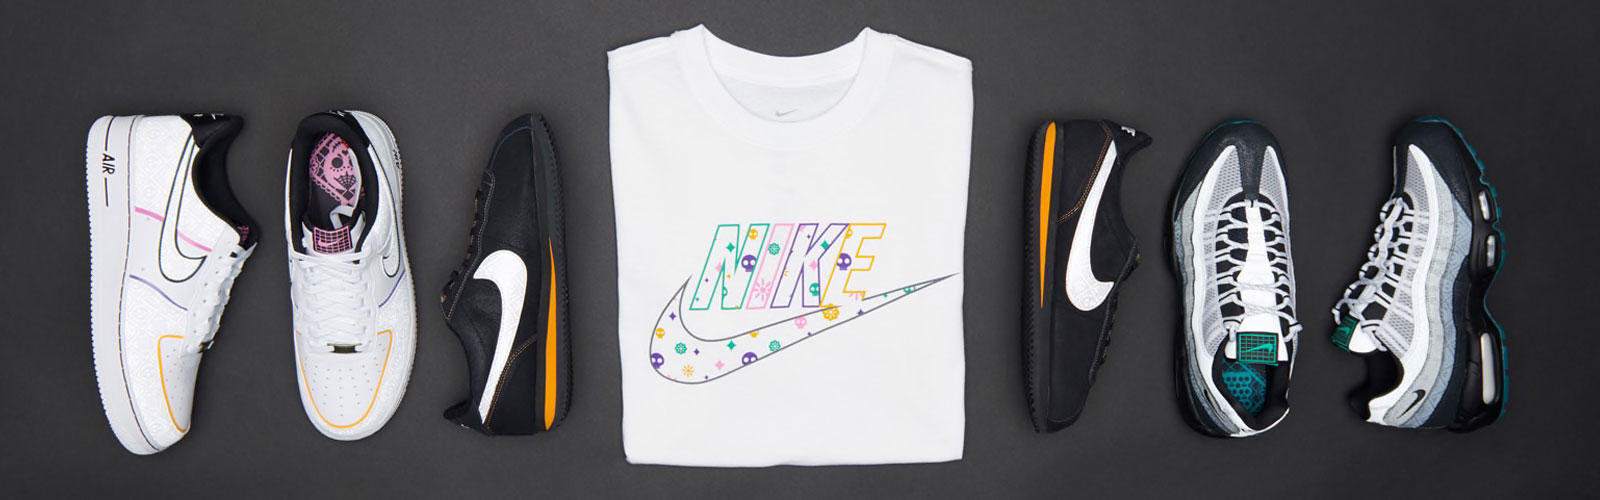 nike-day-of-the-dead-sneakers-apparel